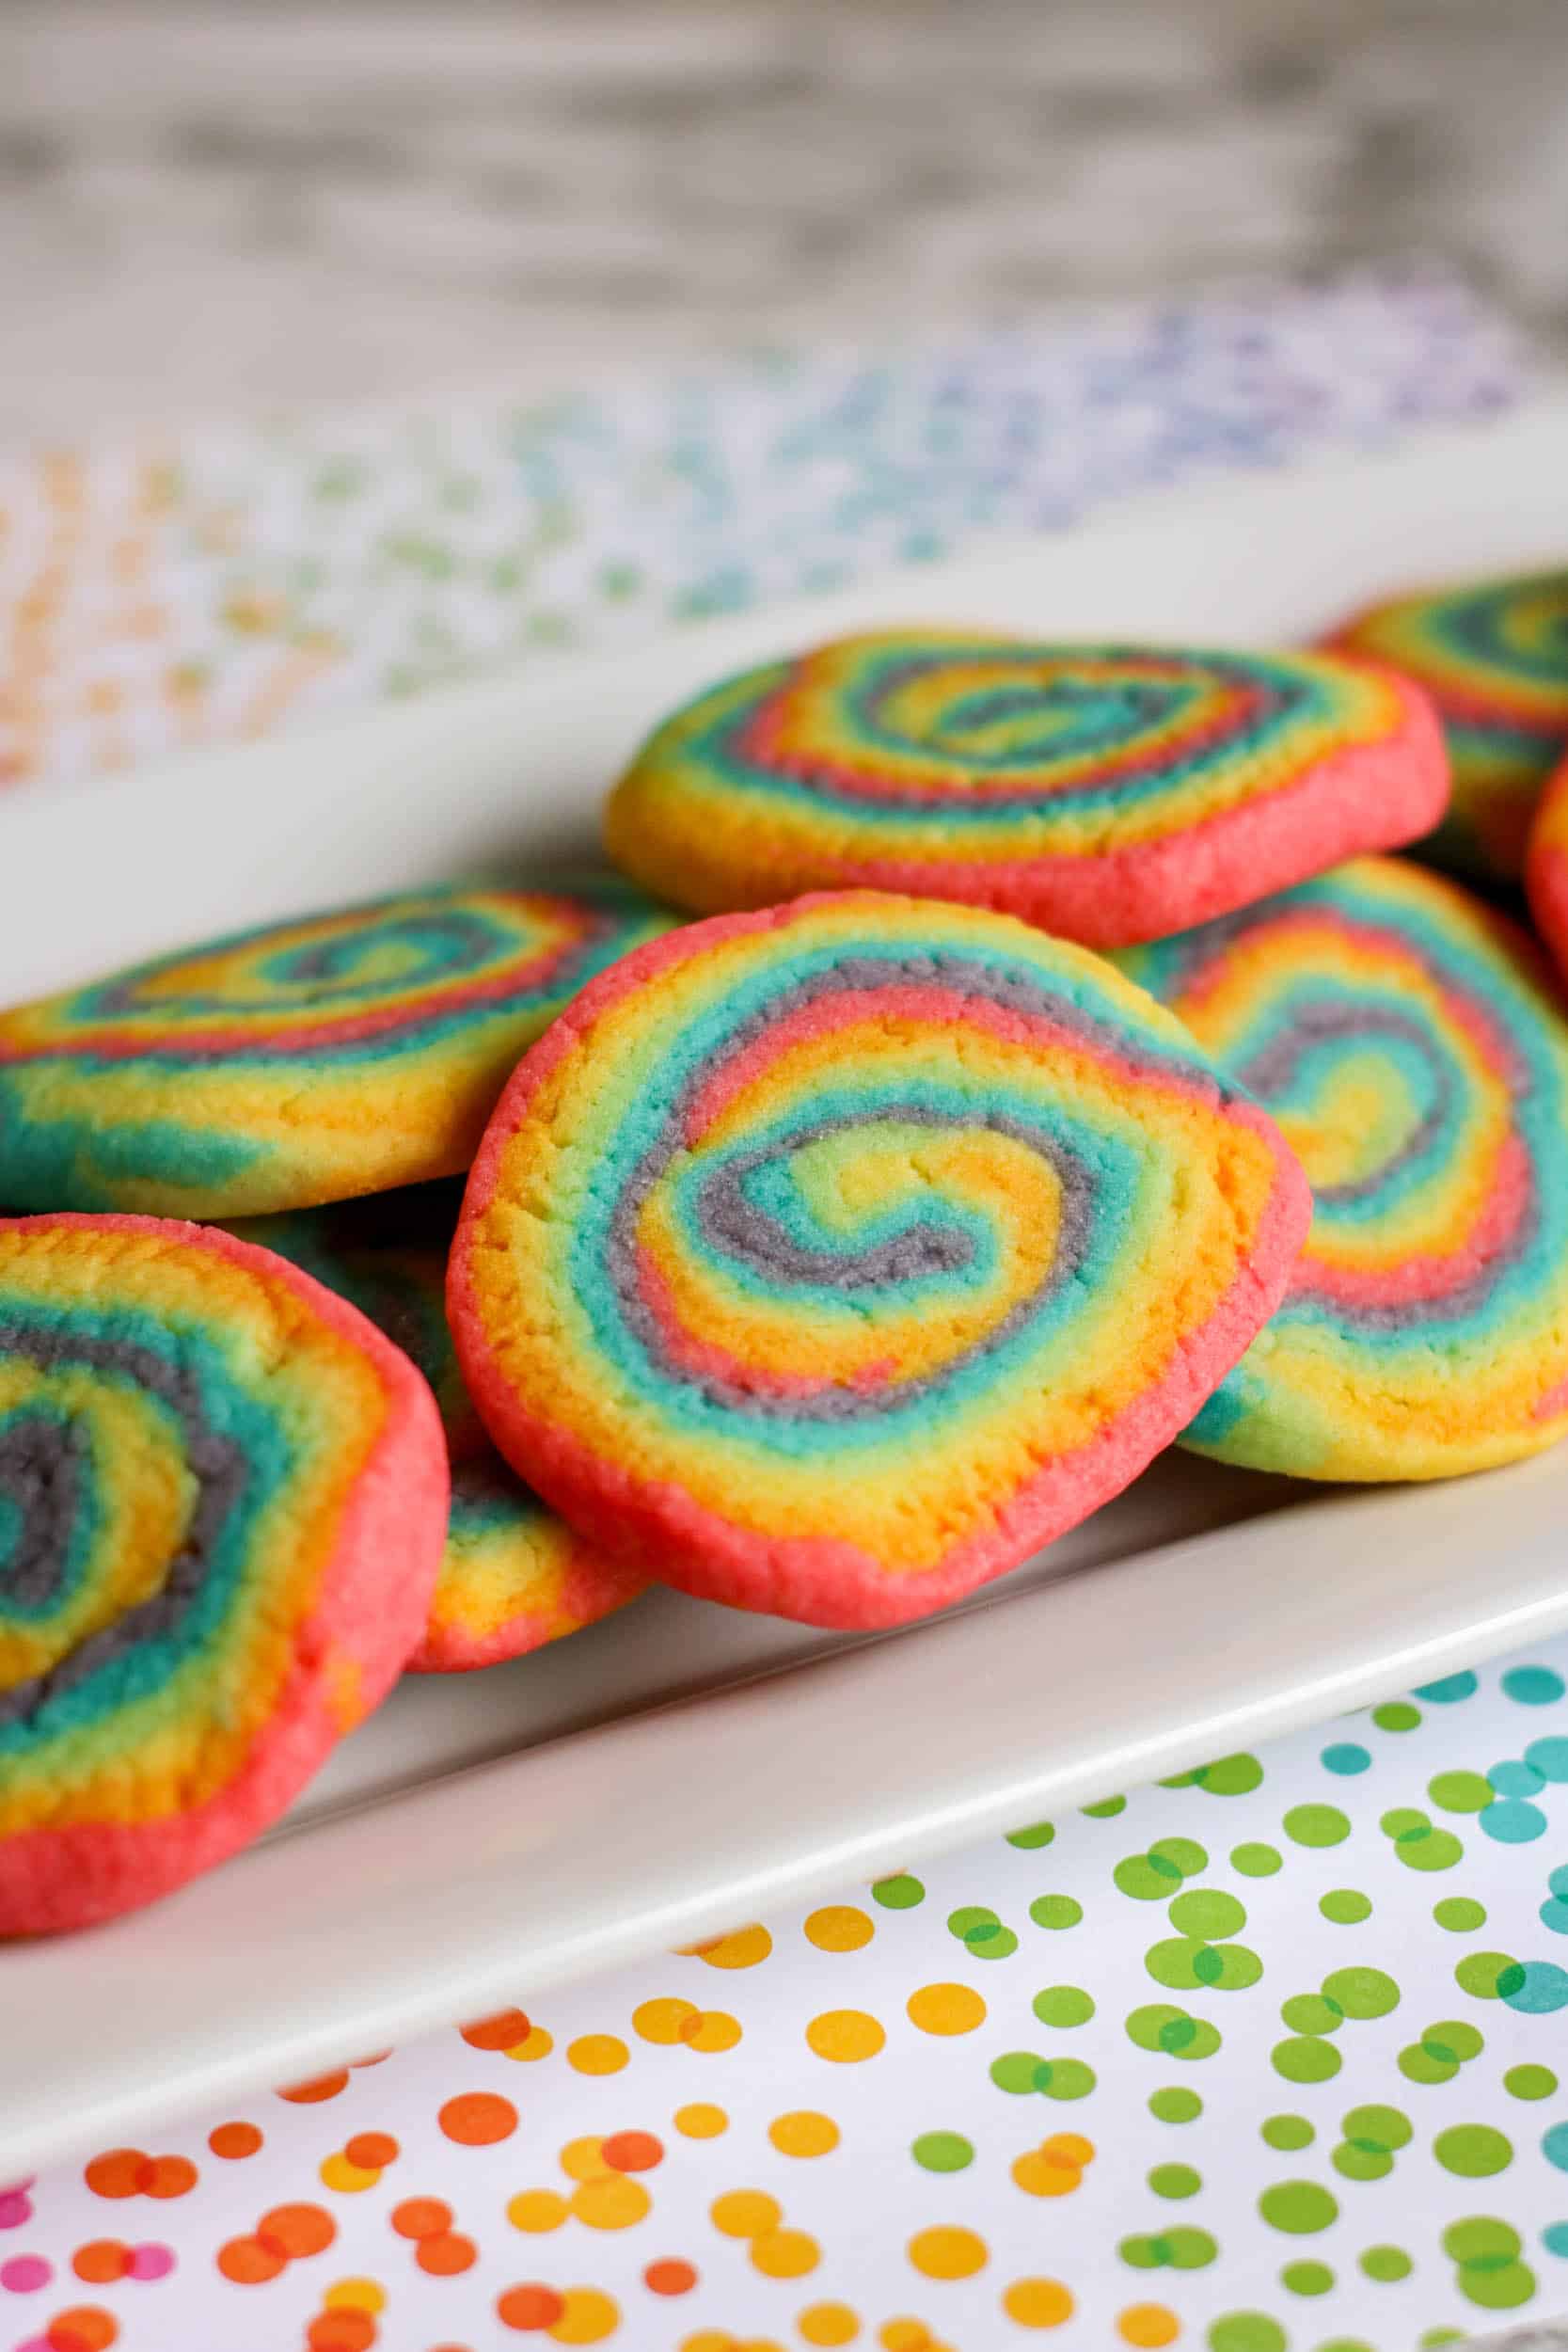 These delicious rainbow sugar cookies are colorful and are perfect for your next unicorn-themed or Pride party. 